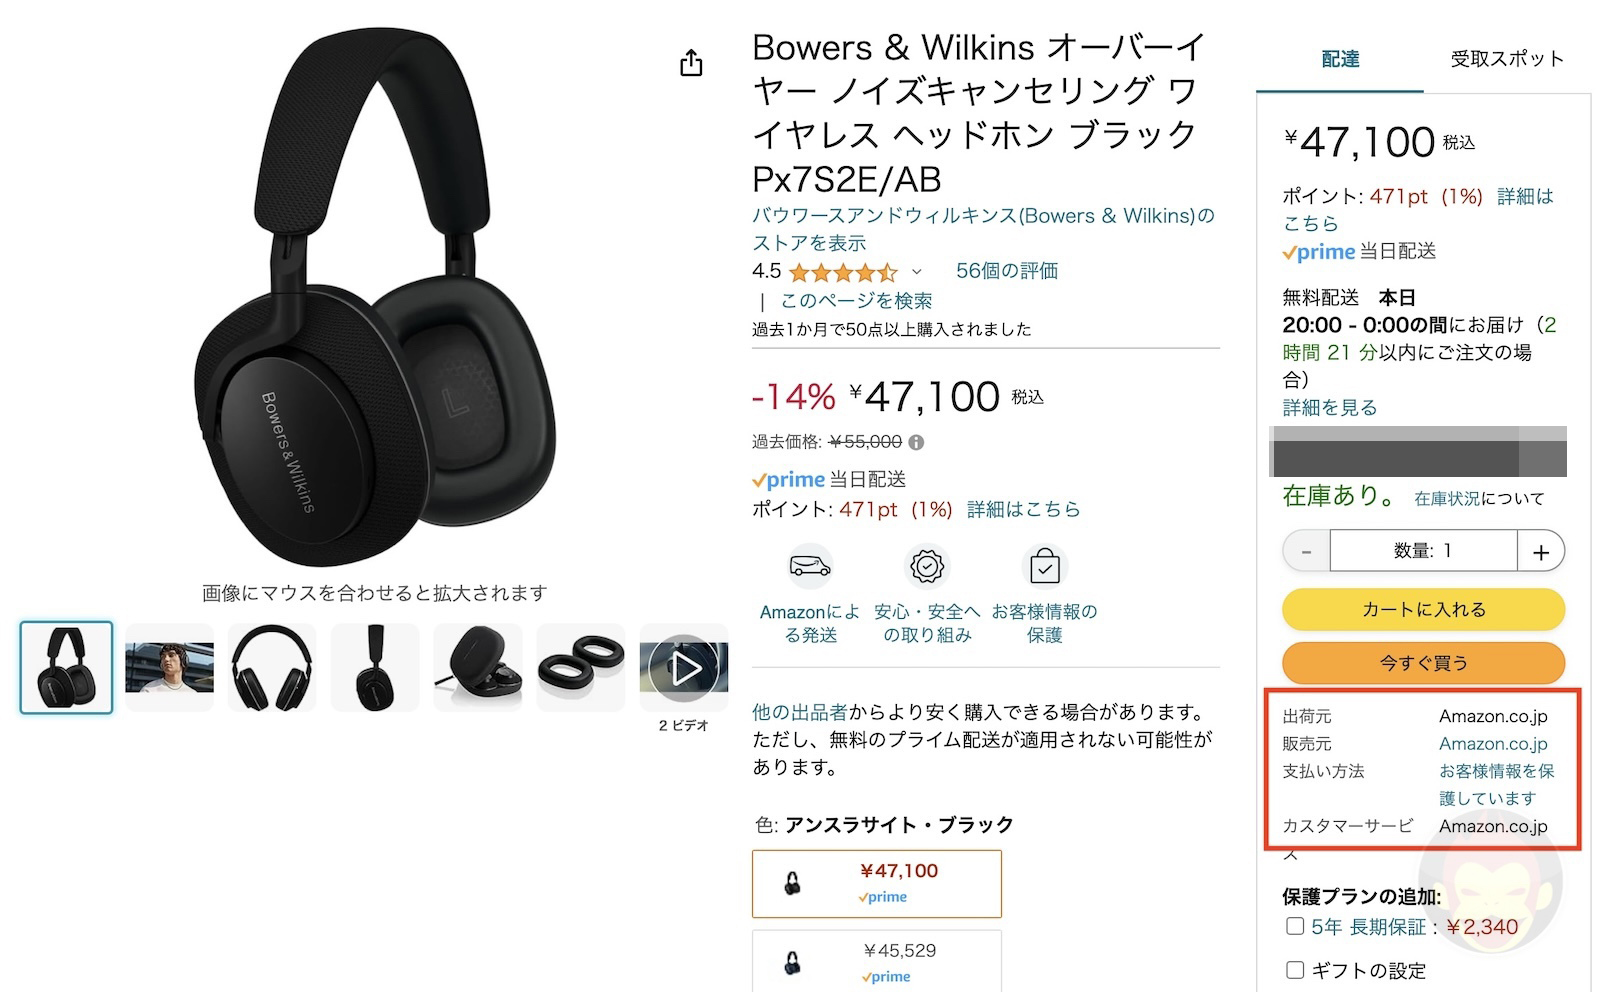 Official Amazon product 01